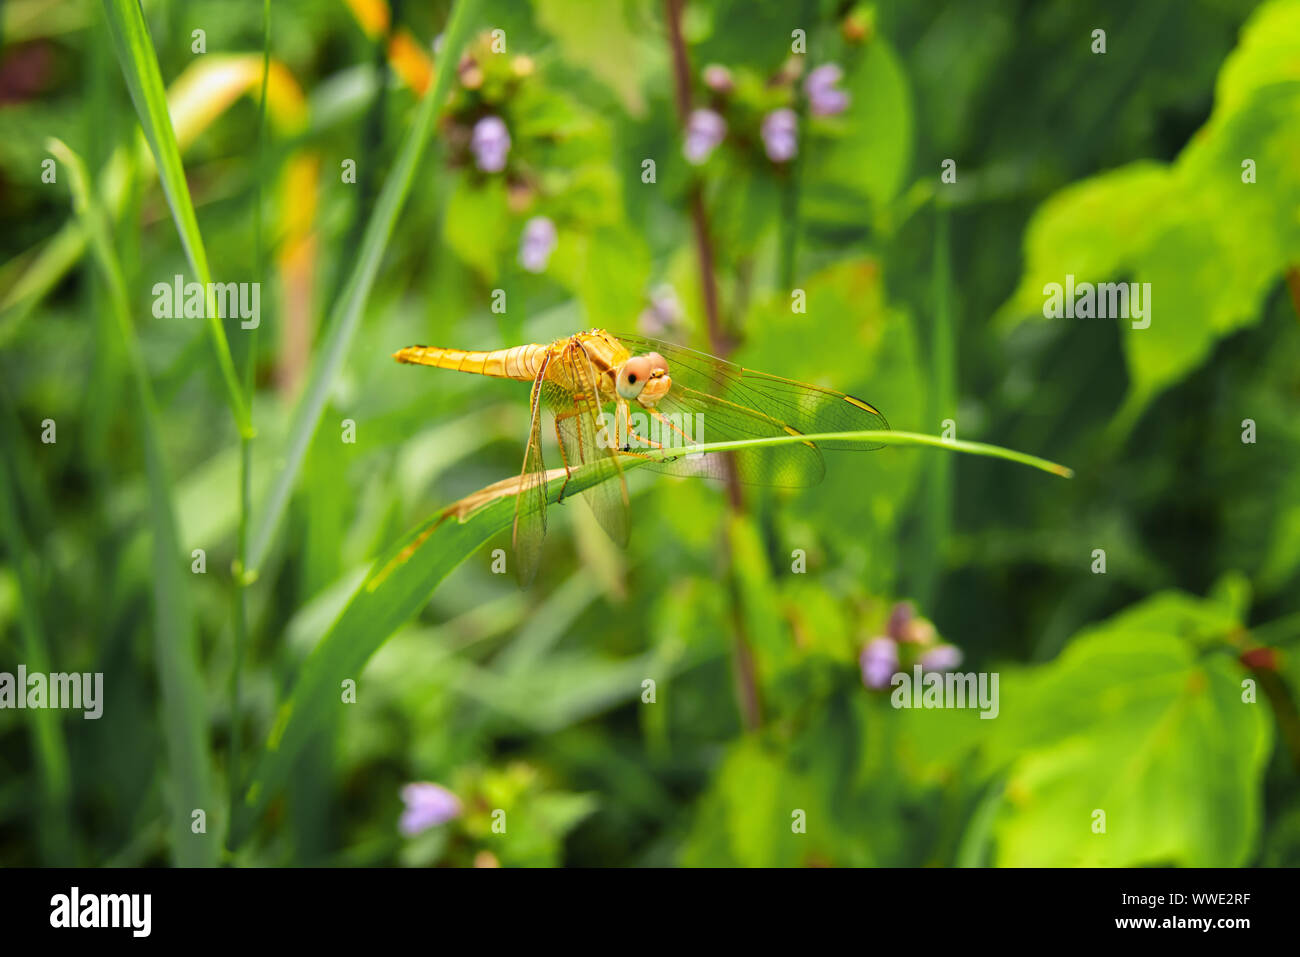 Large bright golden yellow dragonfly resting alone on green grass blade. Sympetrum flaveolum specie. Unfocused blooming meadow at background.  Selecti Stock Photo